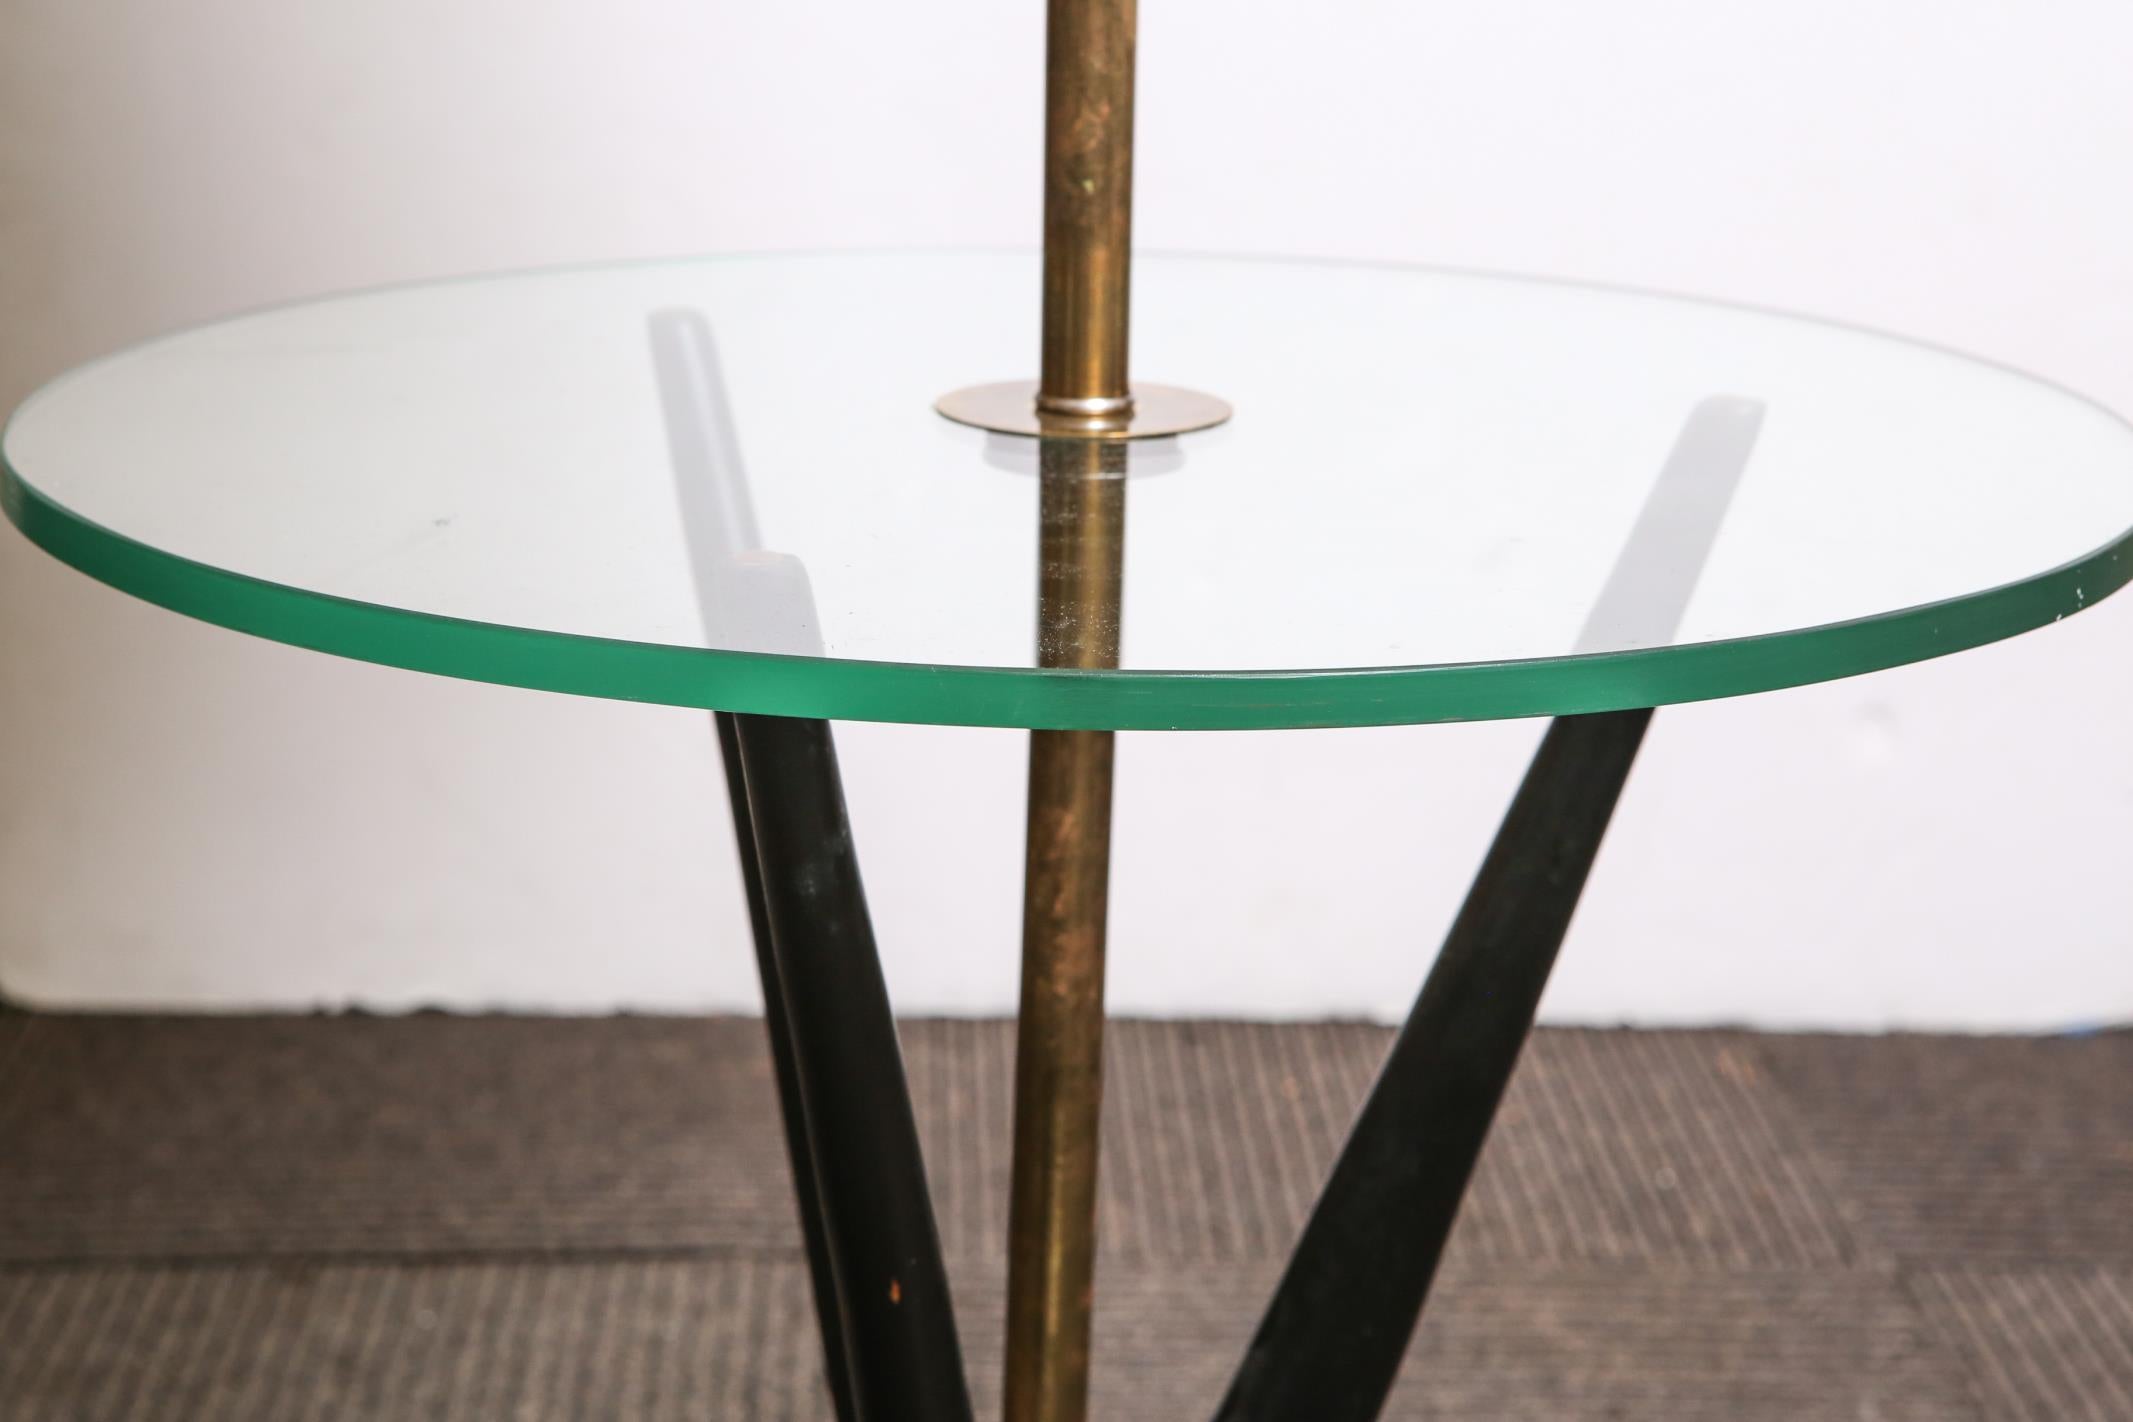 Mid-Century Modern lamp table in the style of Adrian Pearsall, with hardwood frame with glass surface and fitted with a brass light fixture and shade. In great vintage condition with age-appropriate wear to the shade.